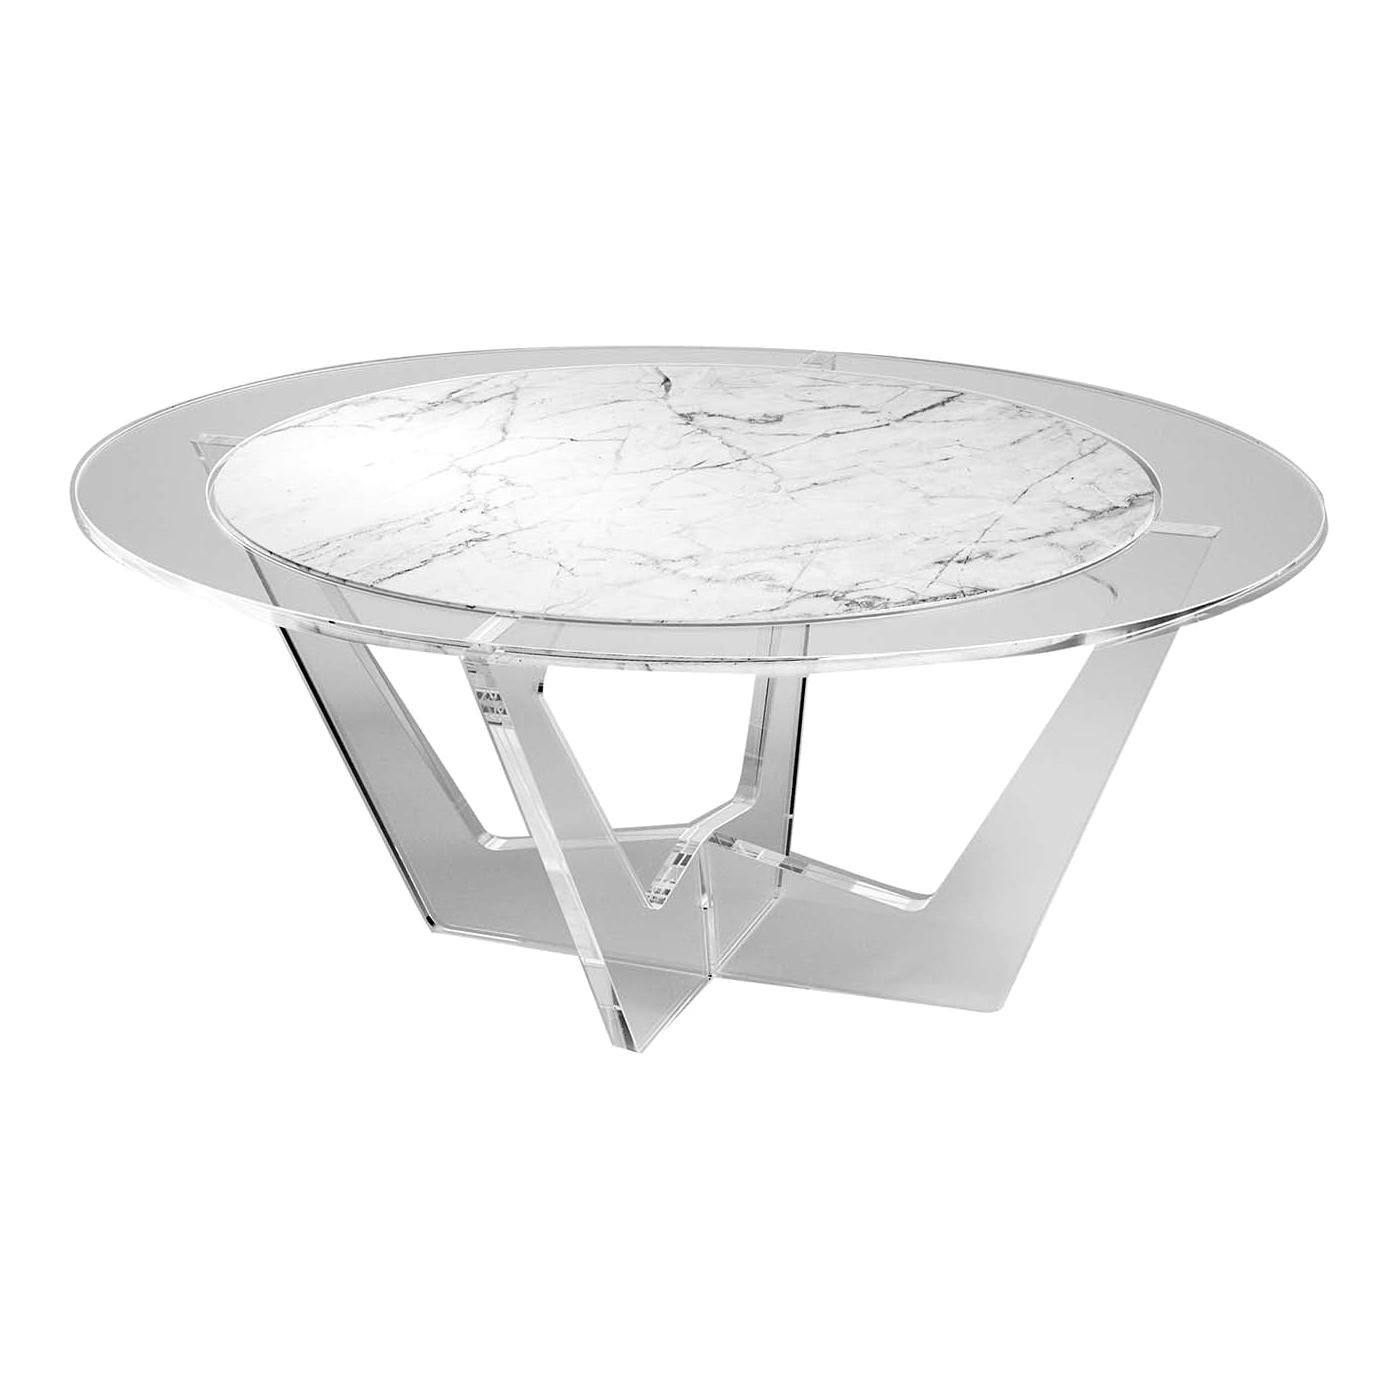 Hac Oval Coffee Table with White Carrara Marble Top by Madea Milano